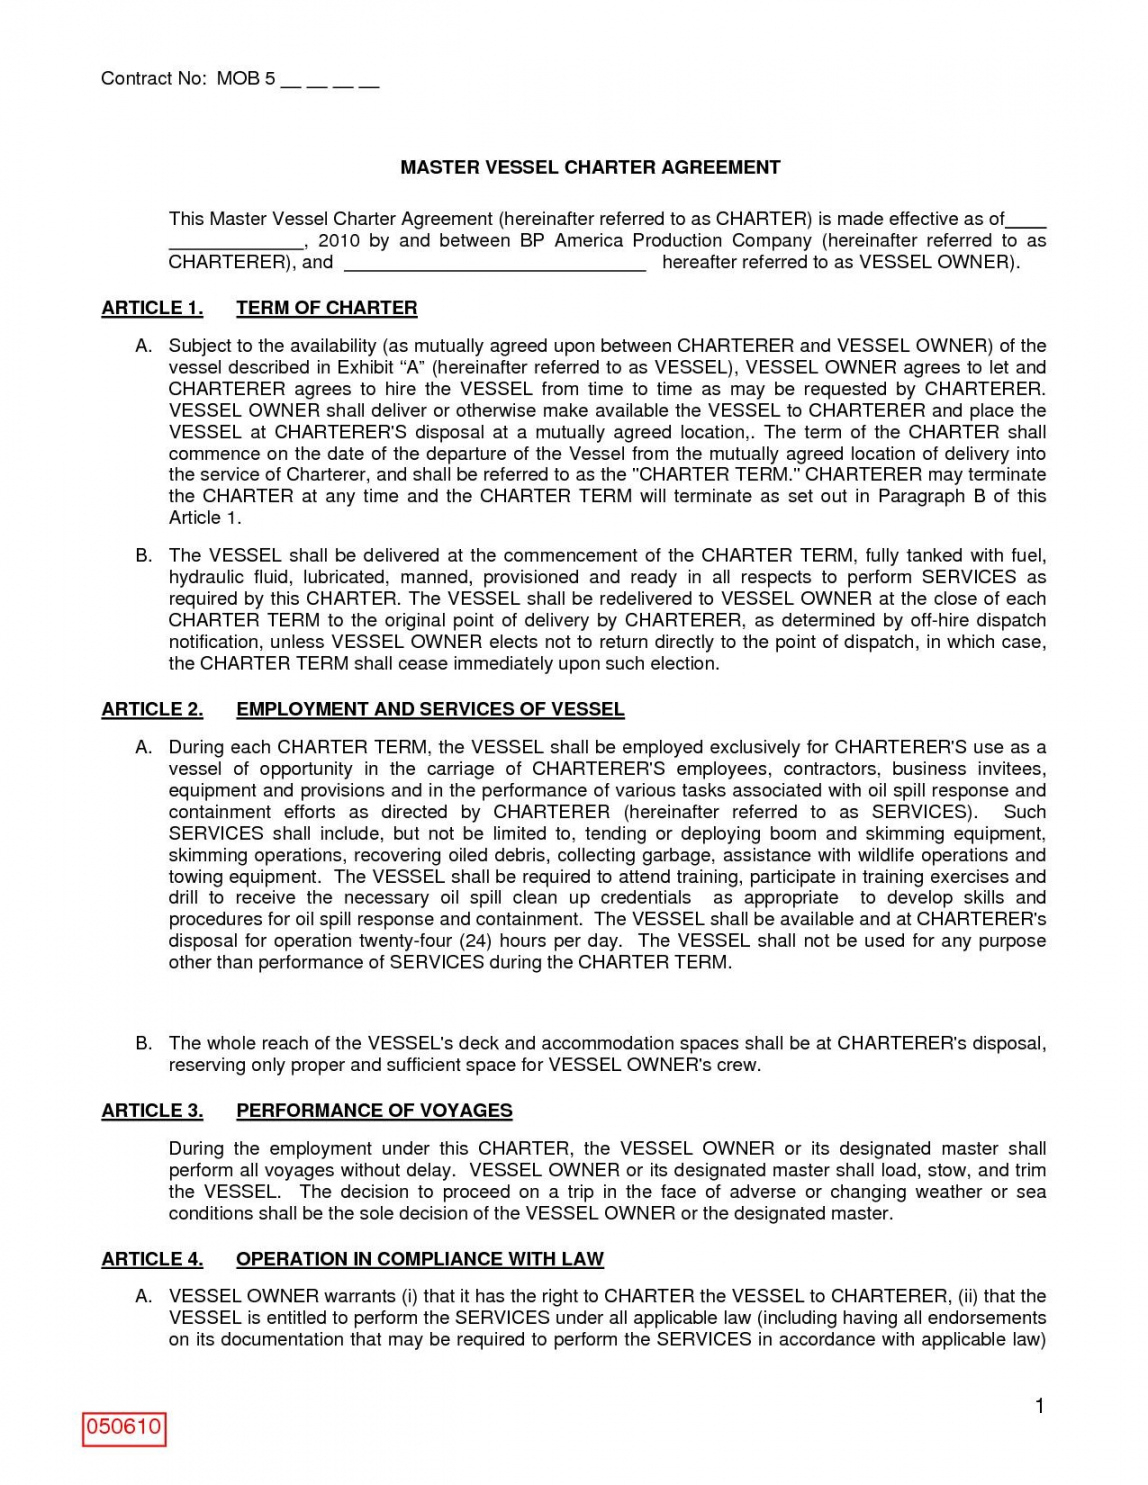 Master Services Agreement Free 004 Template Ideas Master Service Agreement Sample Consulting